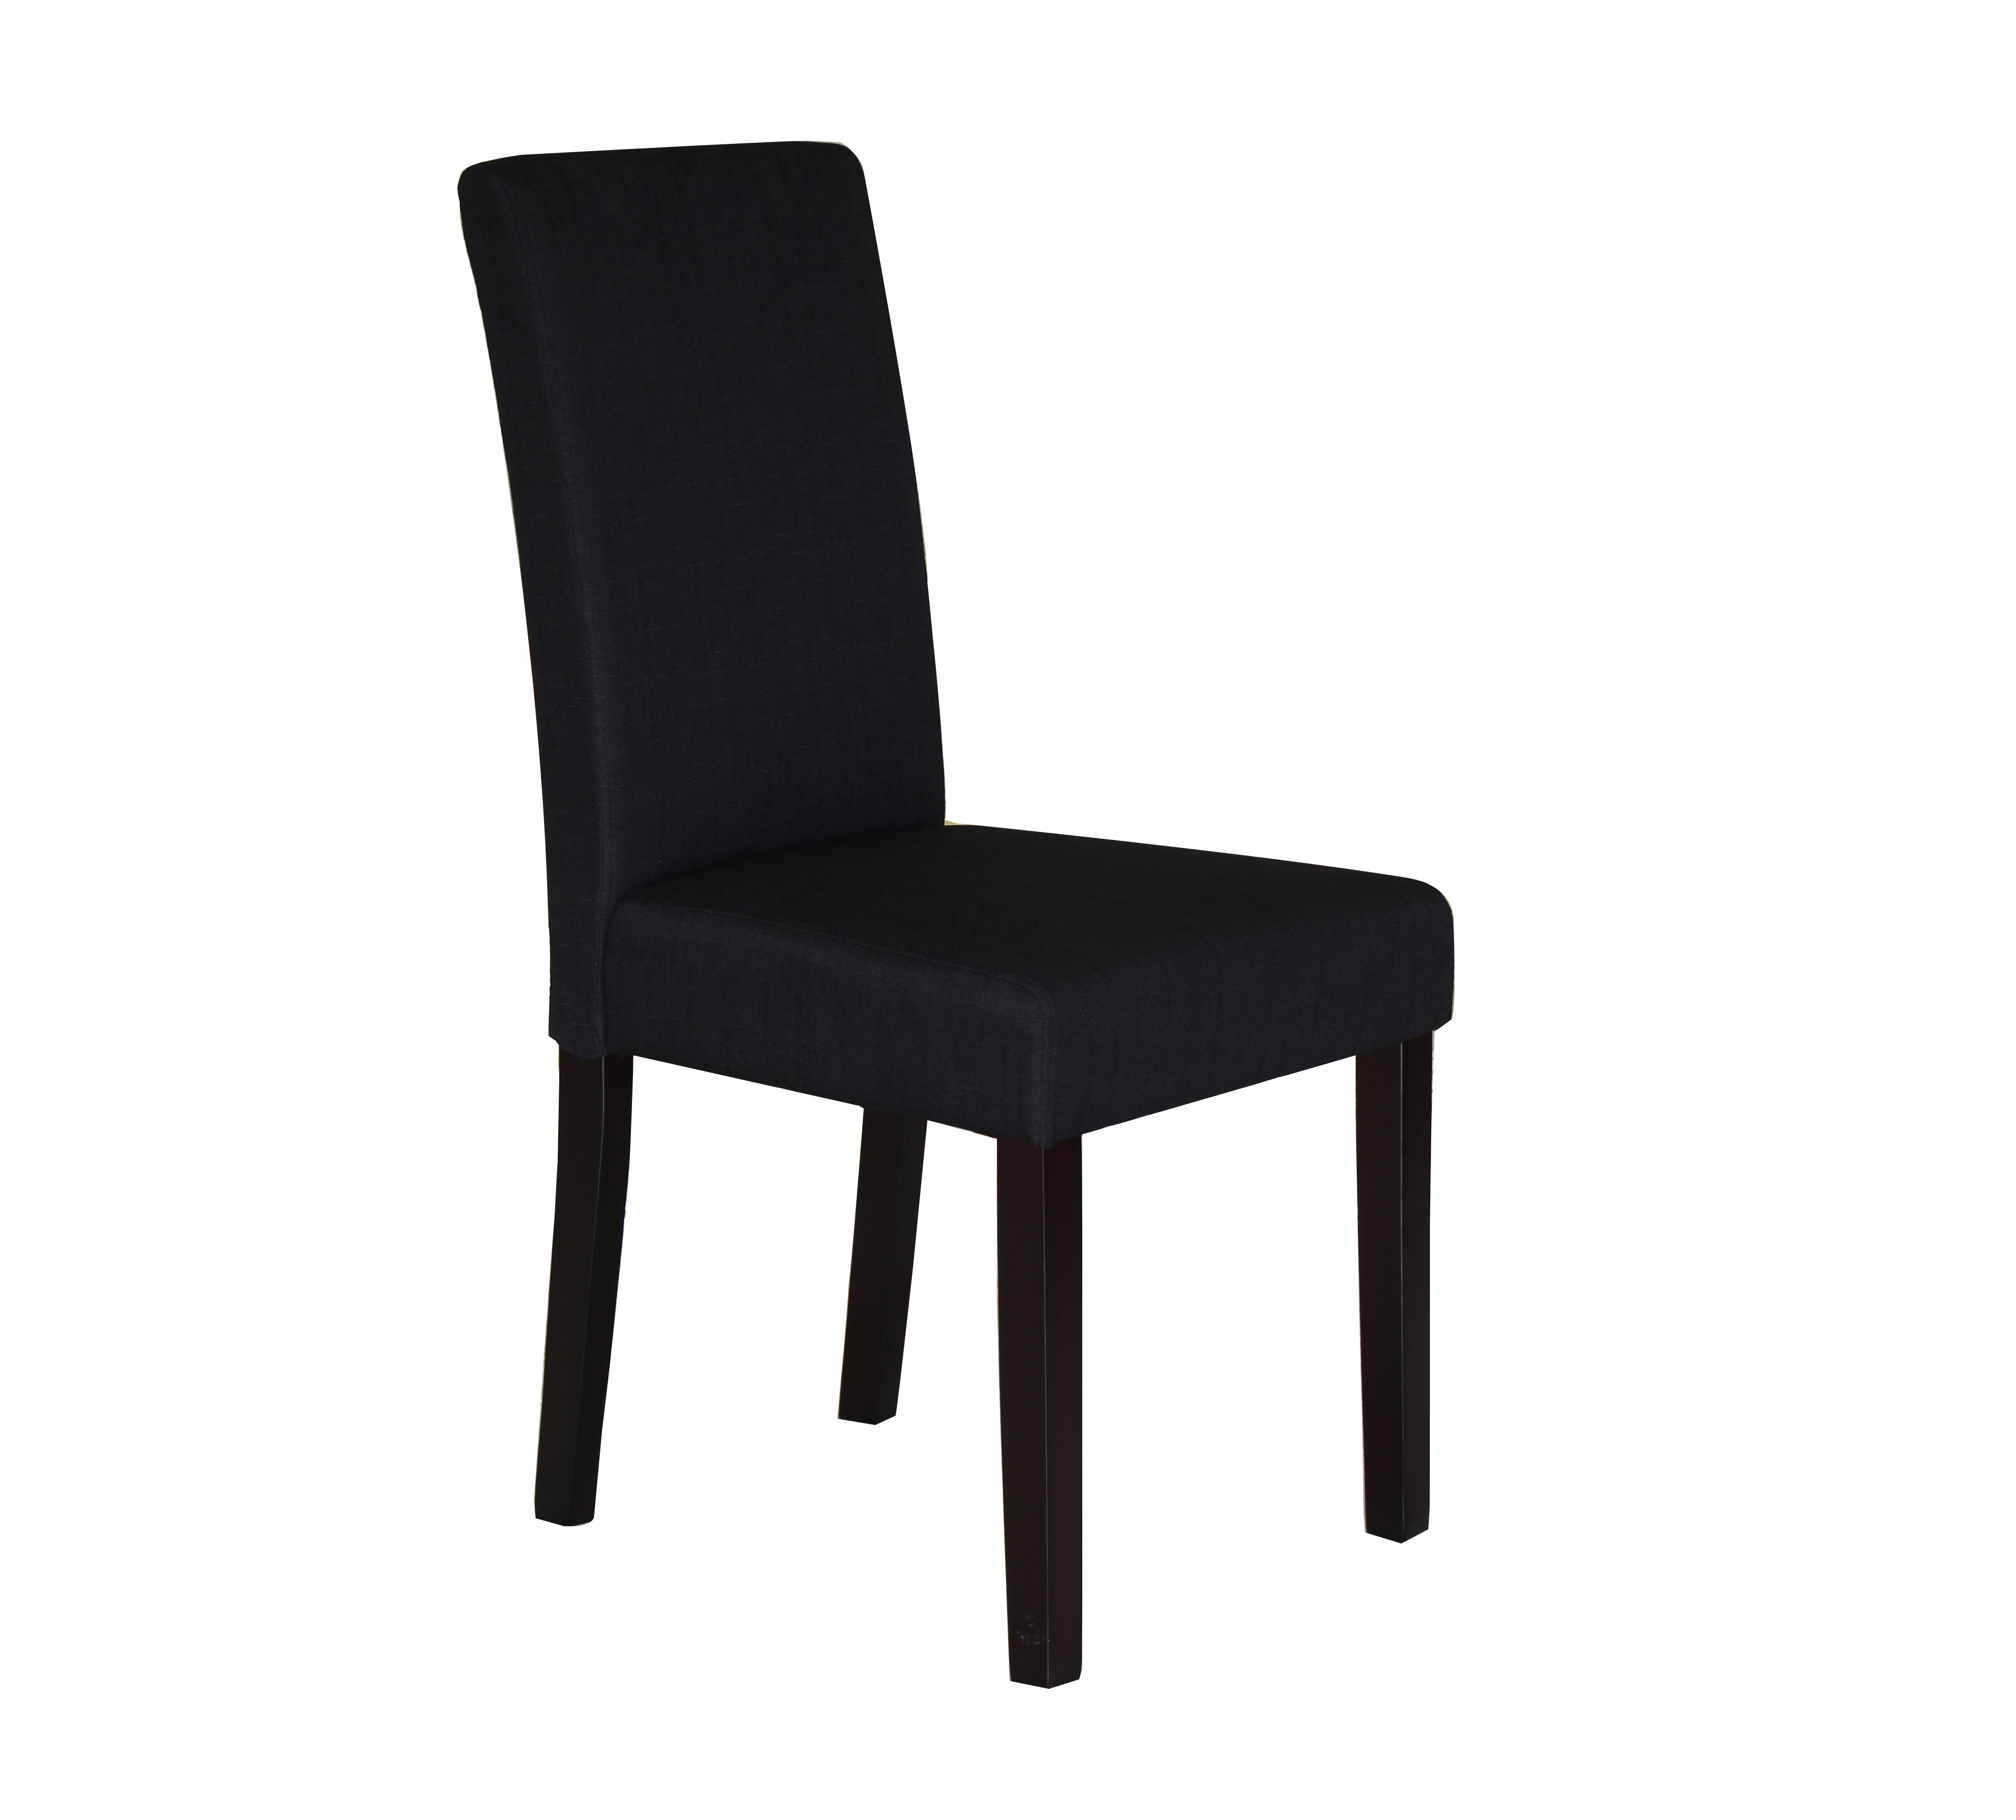 2 x Premium Fabric Linen Palermo Dining Chairs High Back - Black  Z2723